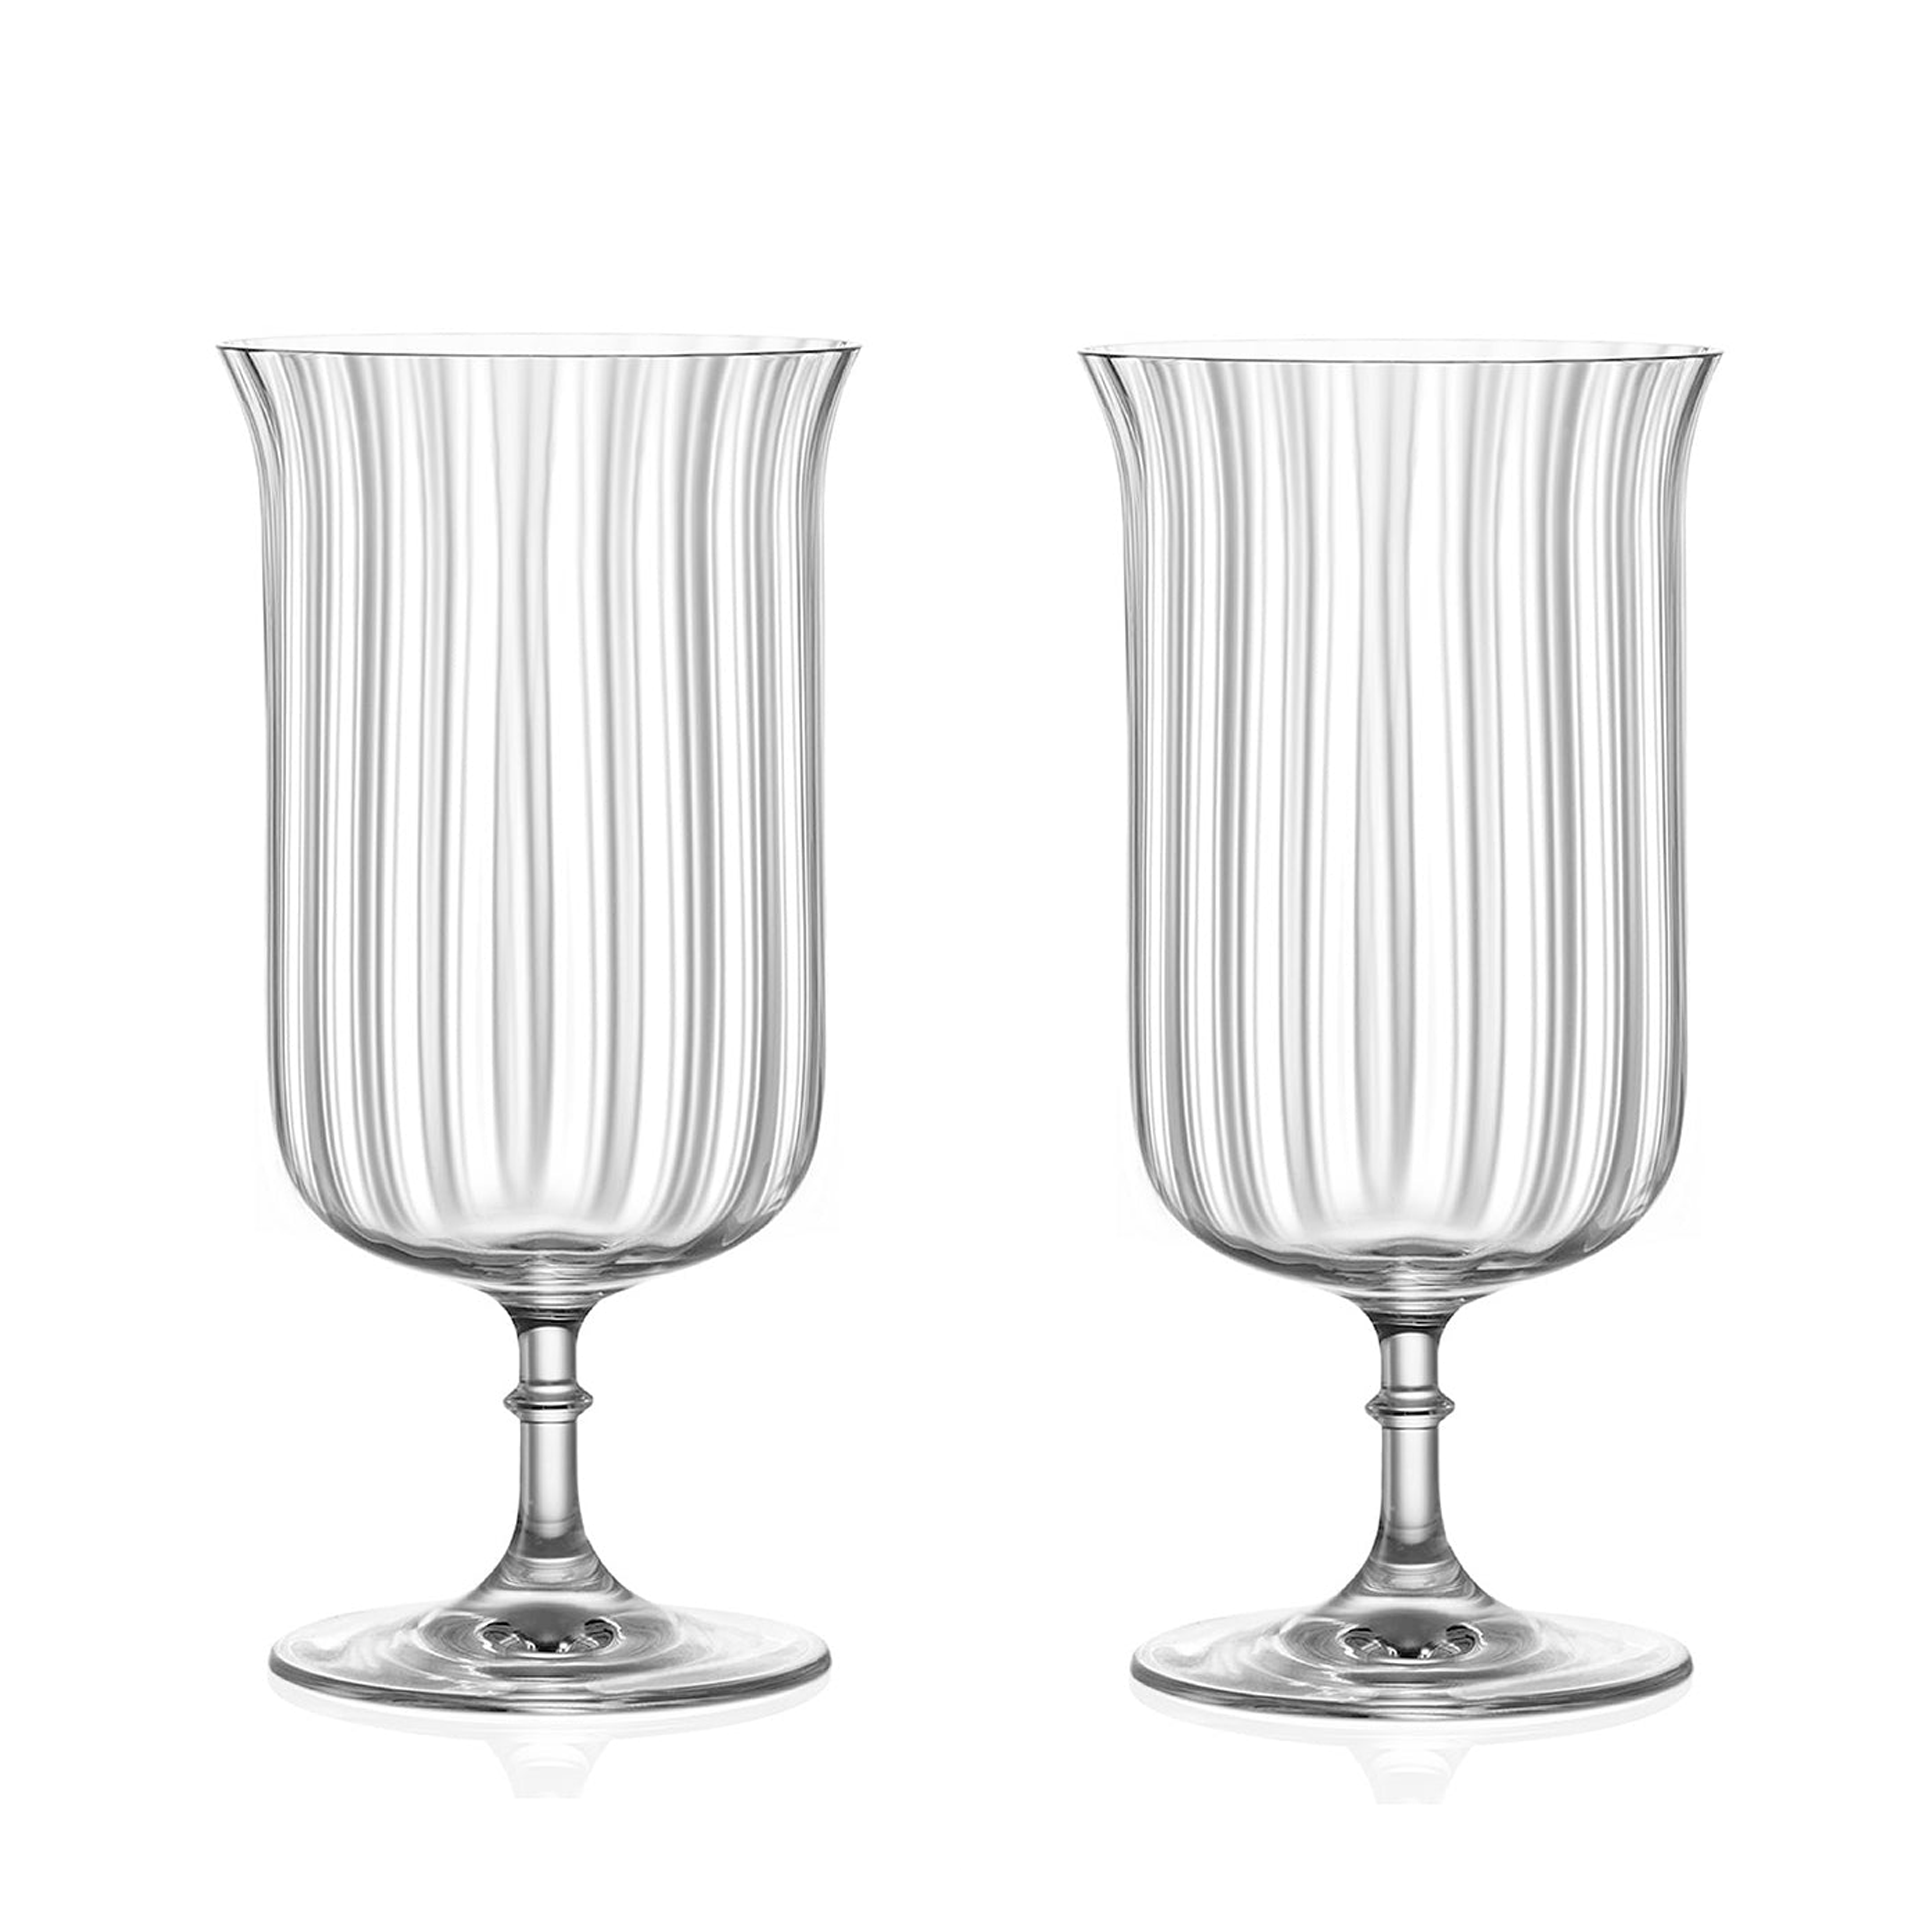 Rims Orient-Coupe Gin Sour/Long Island Ribbed Cocktail Glasses - (Deco) Set of 2 (11.5oz / 340mL)